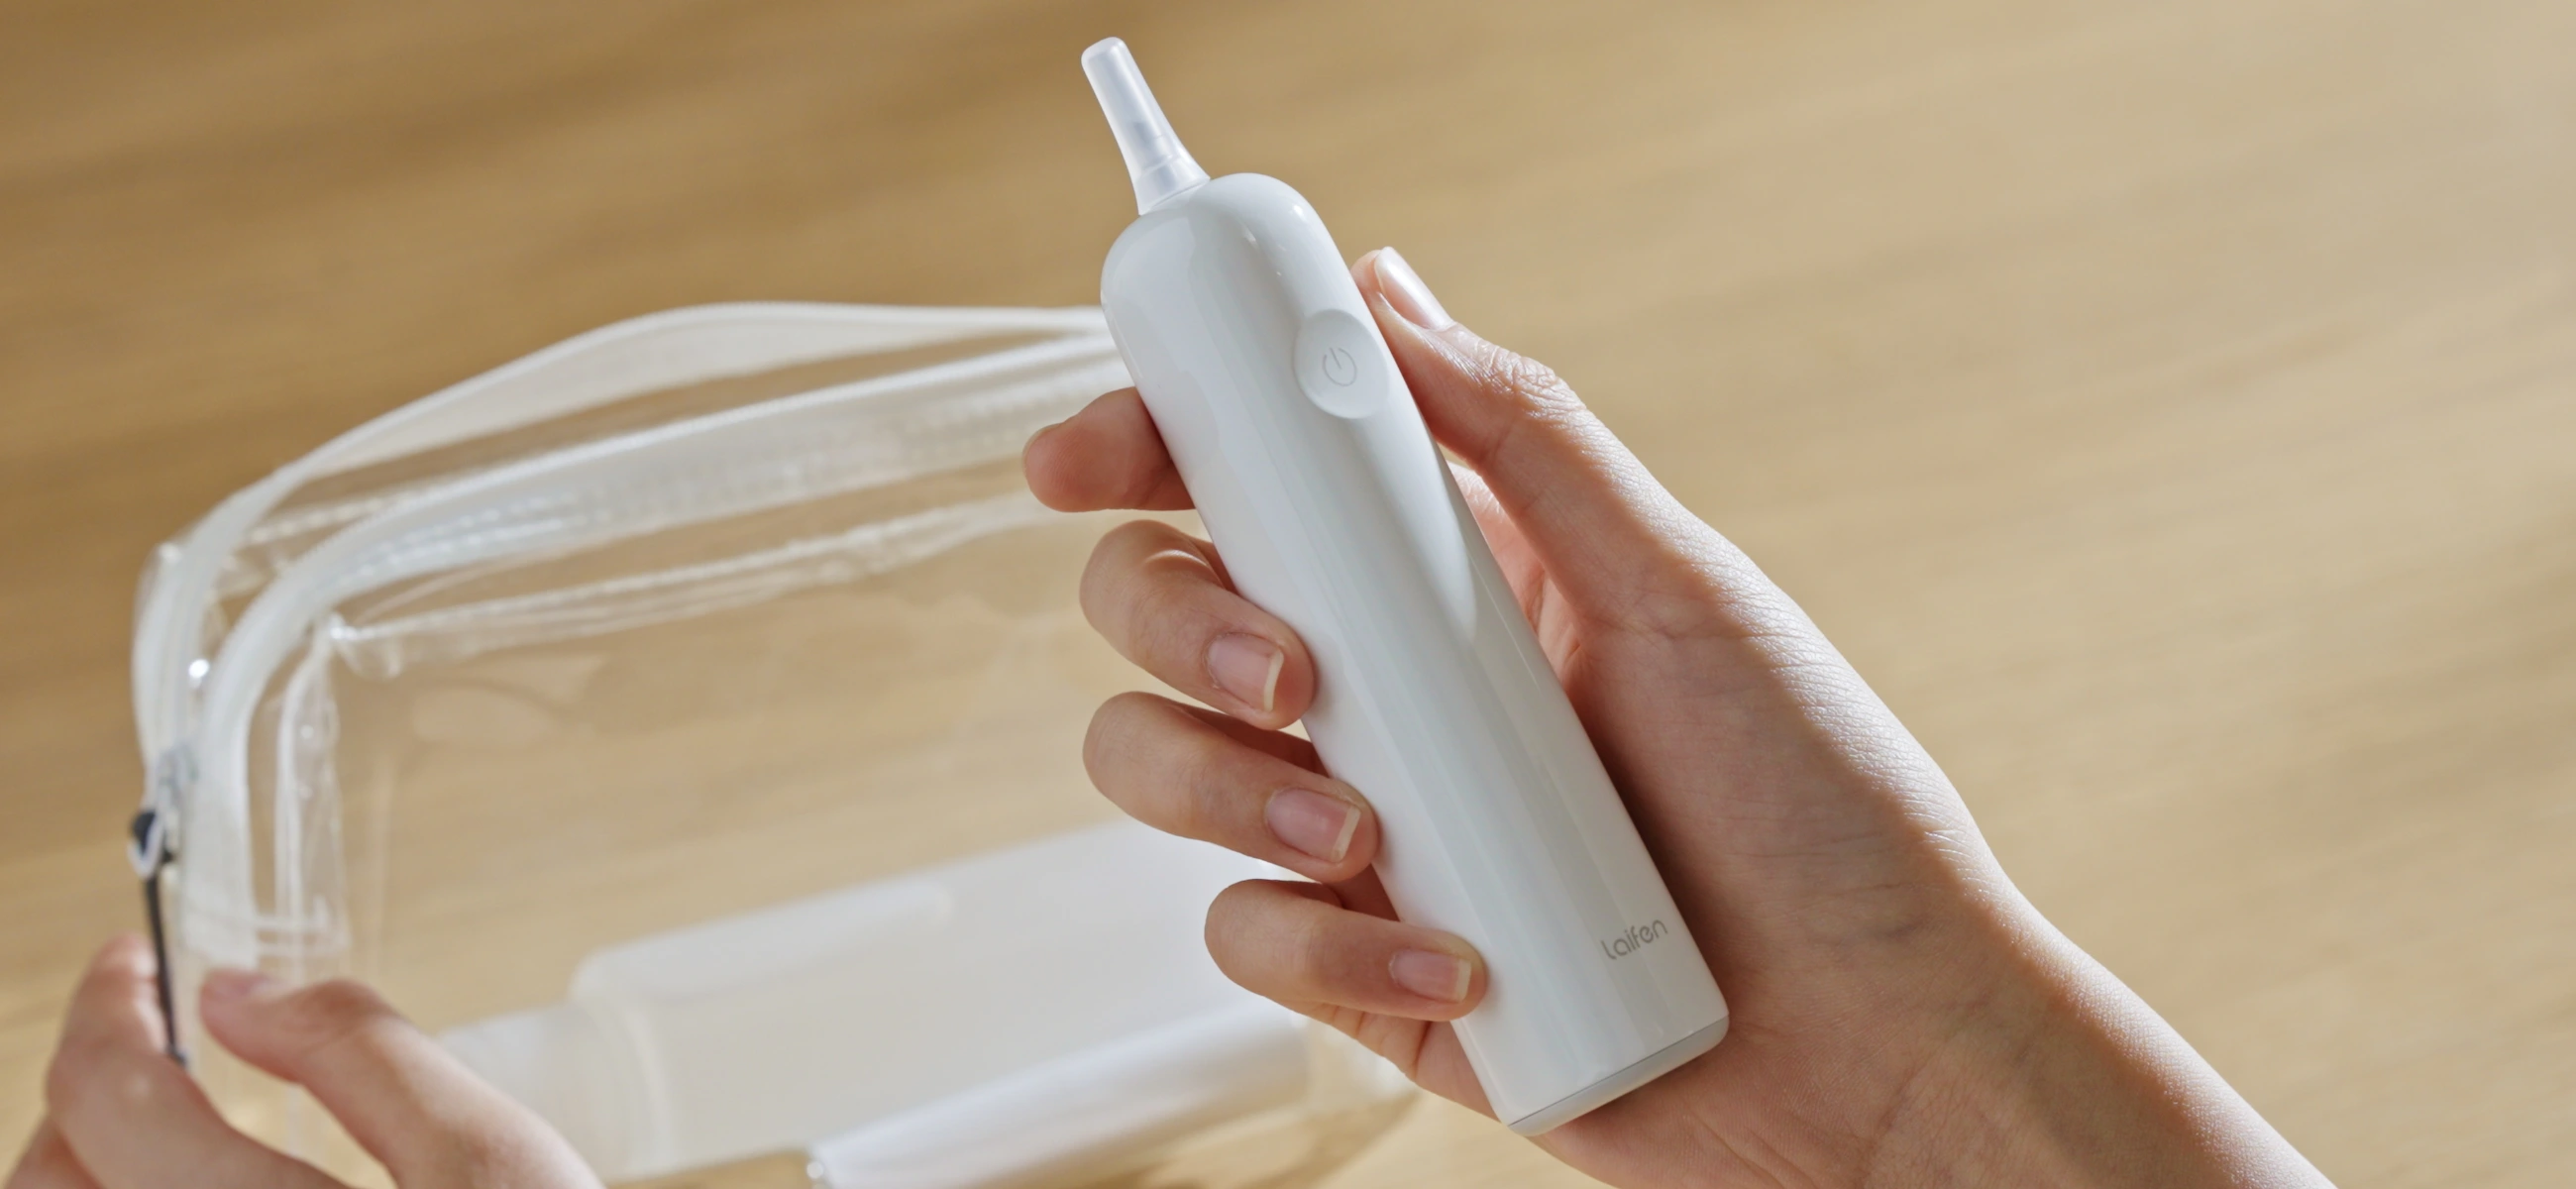 Which is the best portable toothbrush for travel? Laifen Wave!